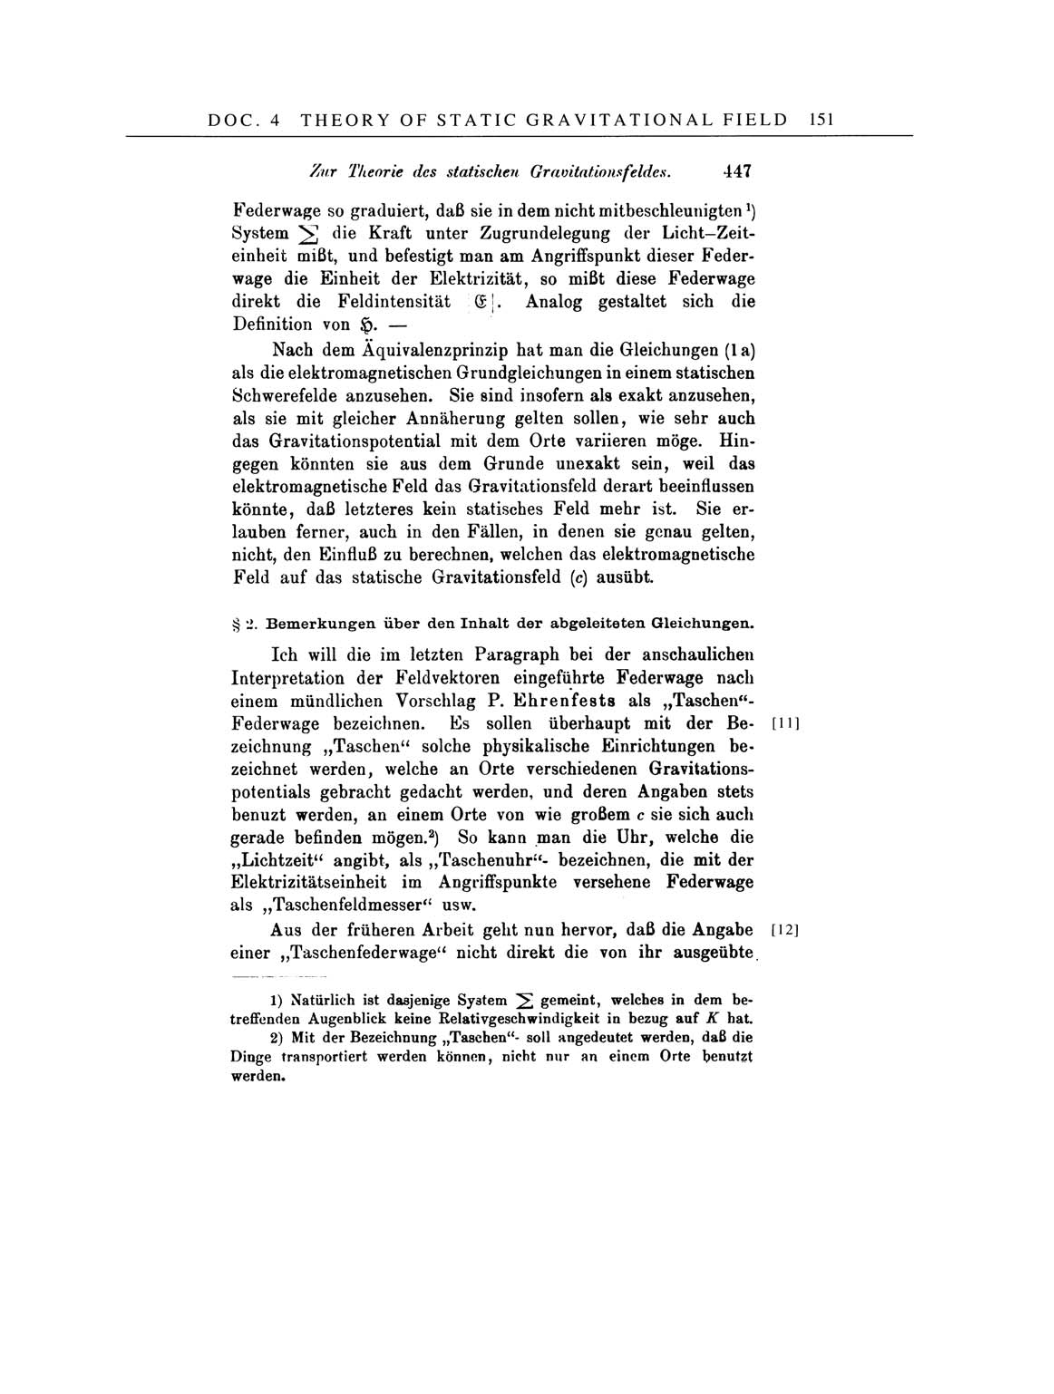 Volume 4: The Swiss Years: Writings 1912-1914 page 151